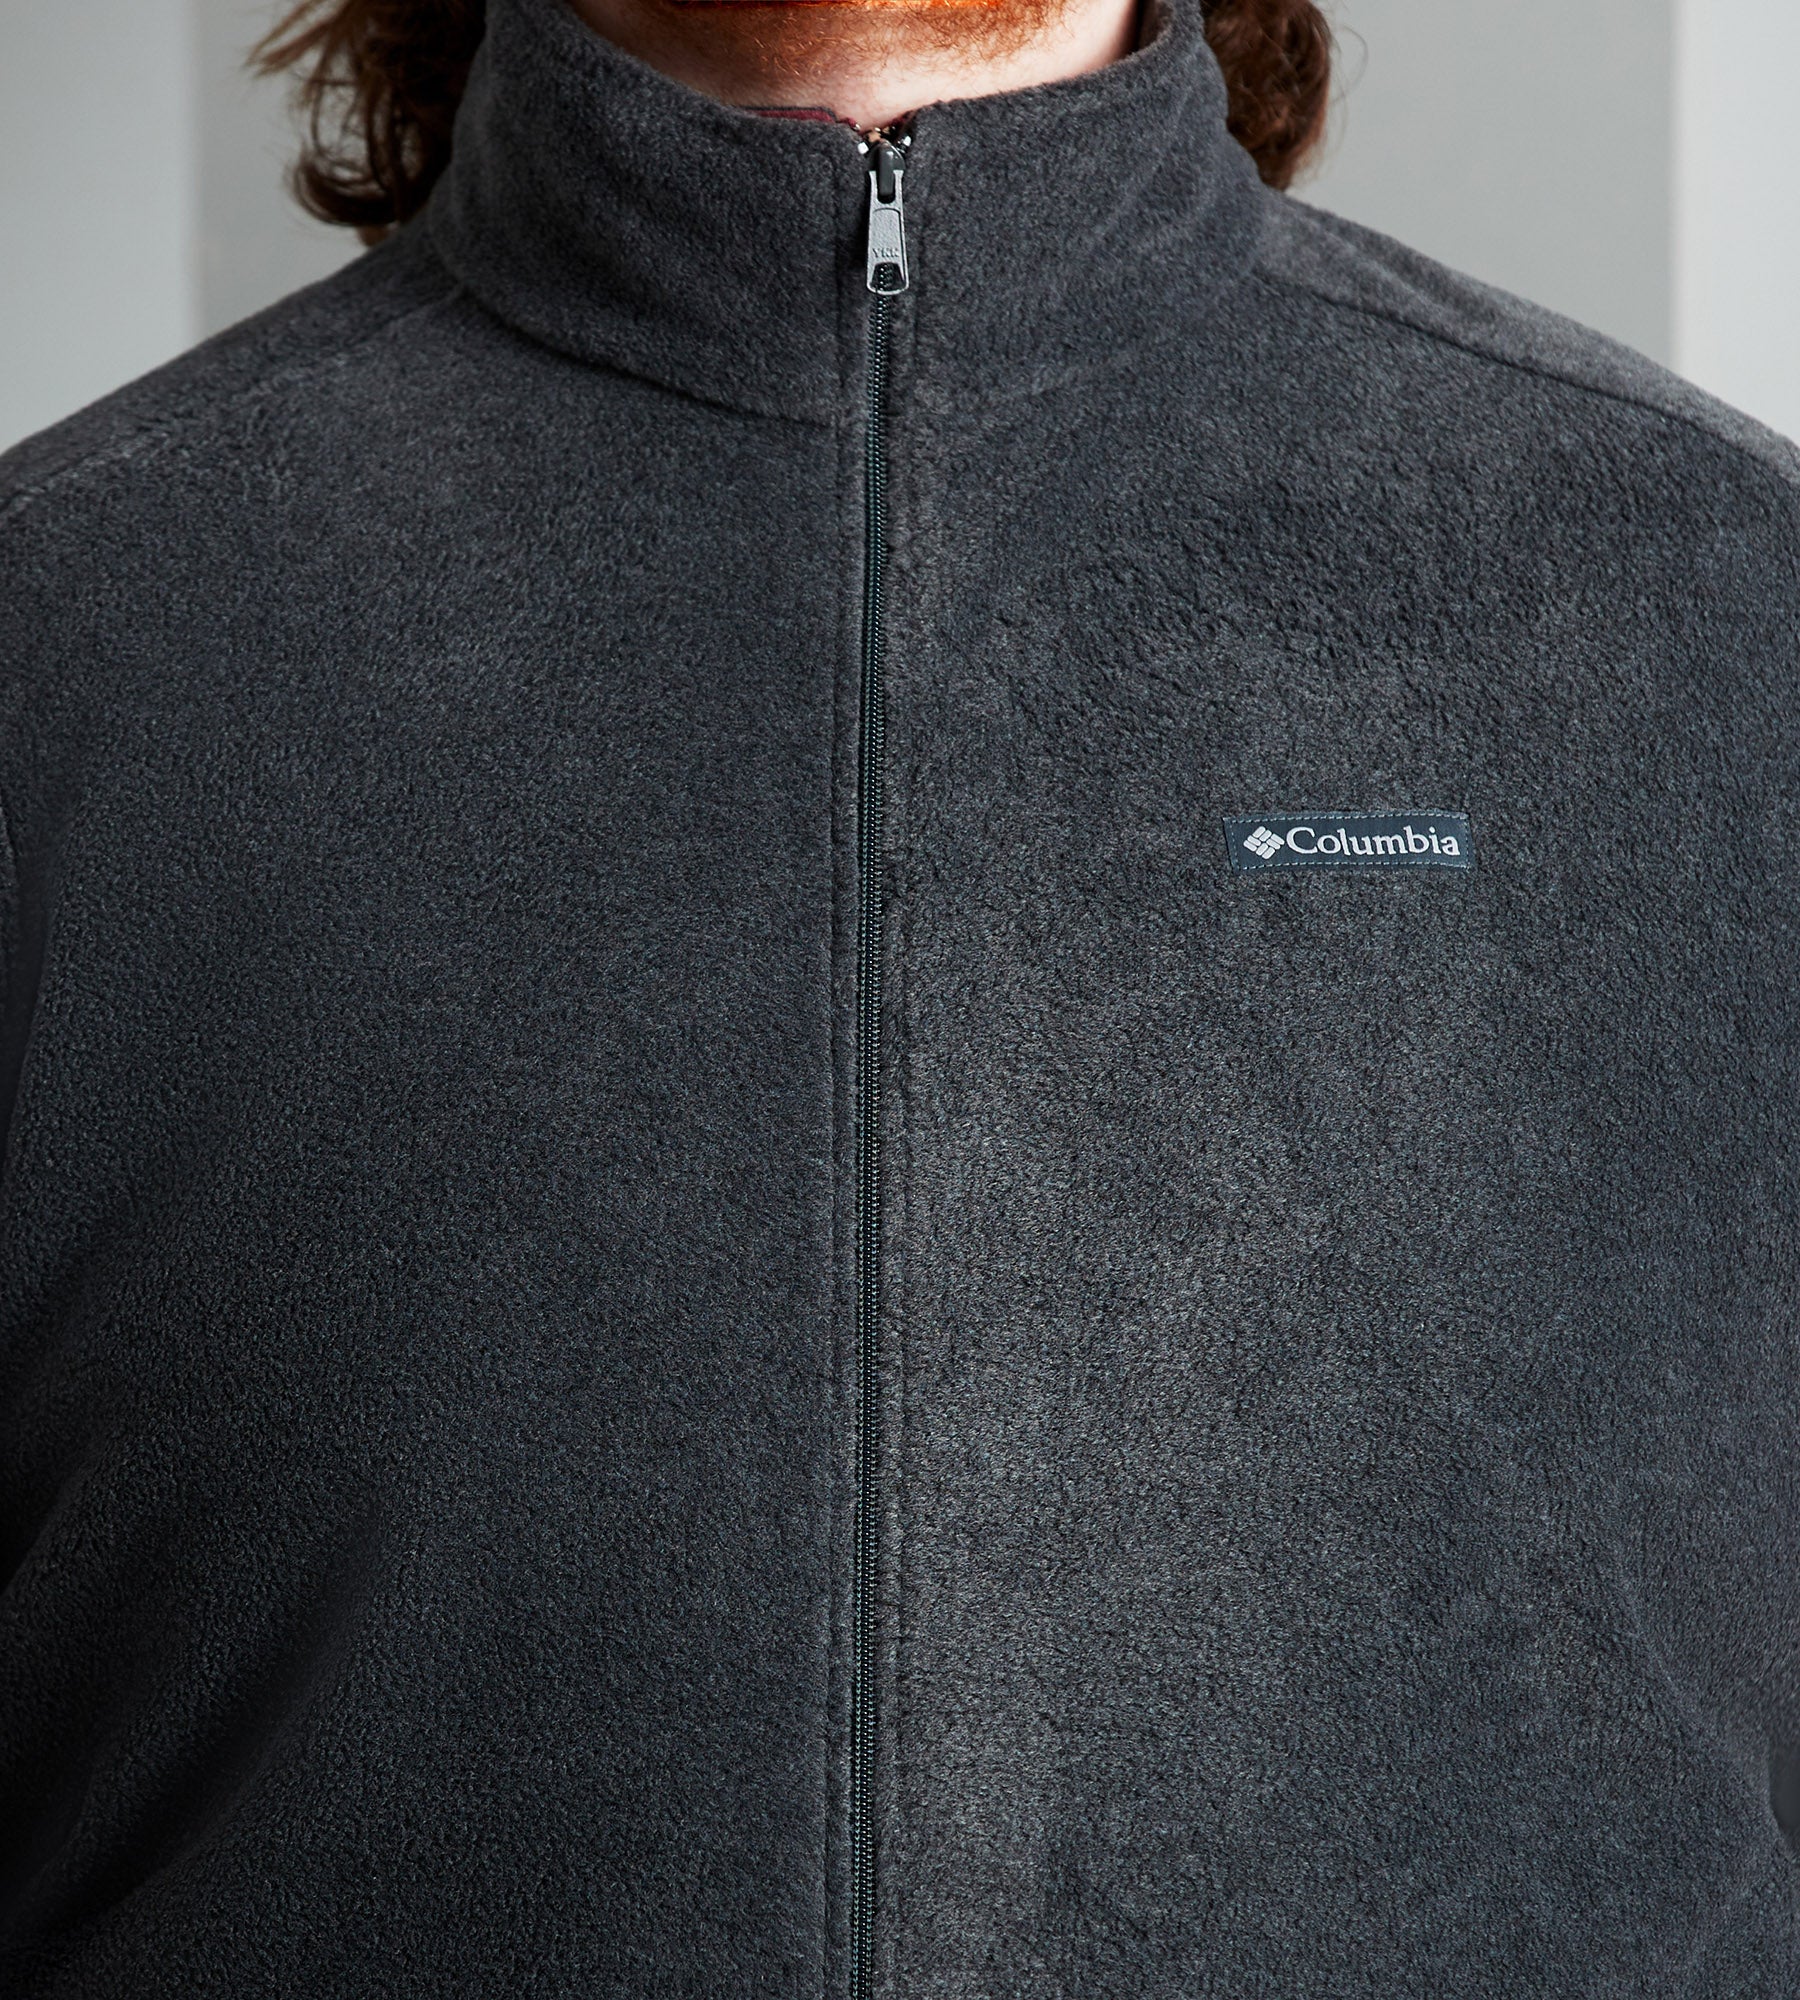   Essentials Men's Full-Zip Polar Fleece Vest (Available  in Big & Tall), Charcoal Heather, X-Small : Clothing, Shoes & Jewelry